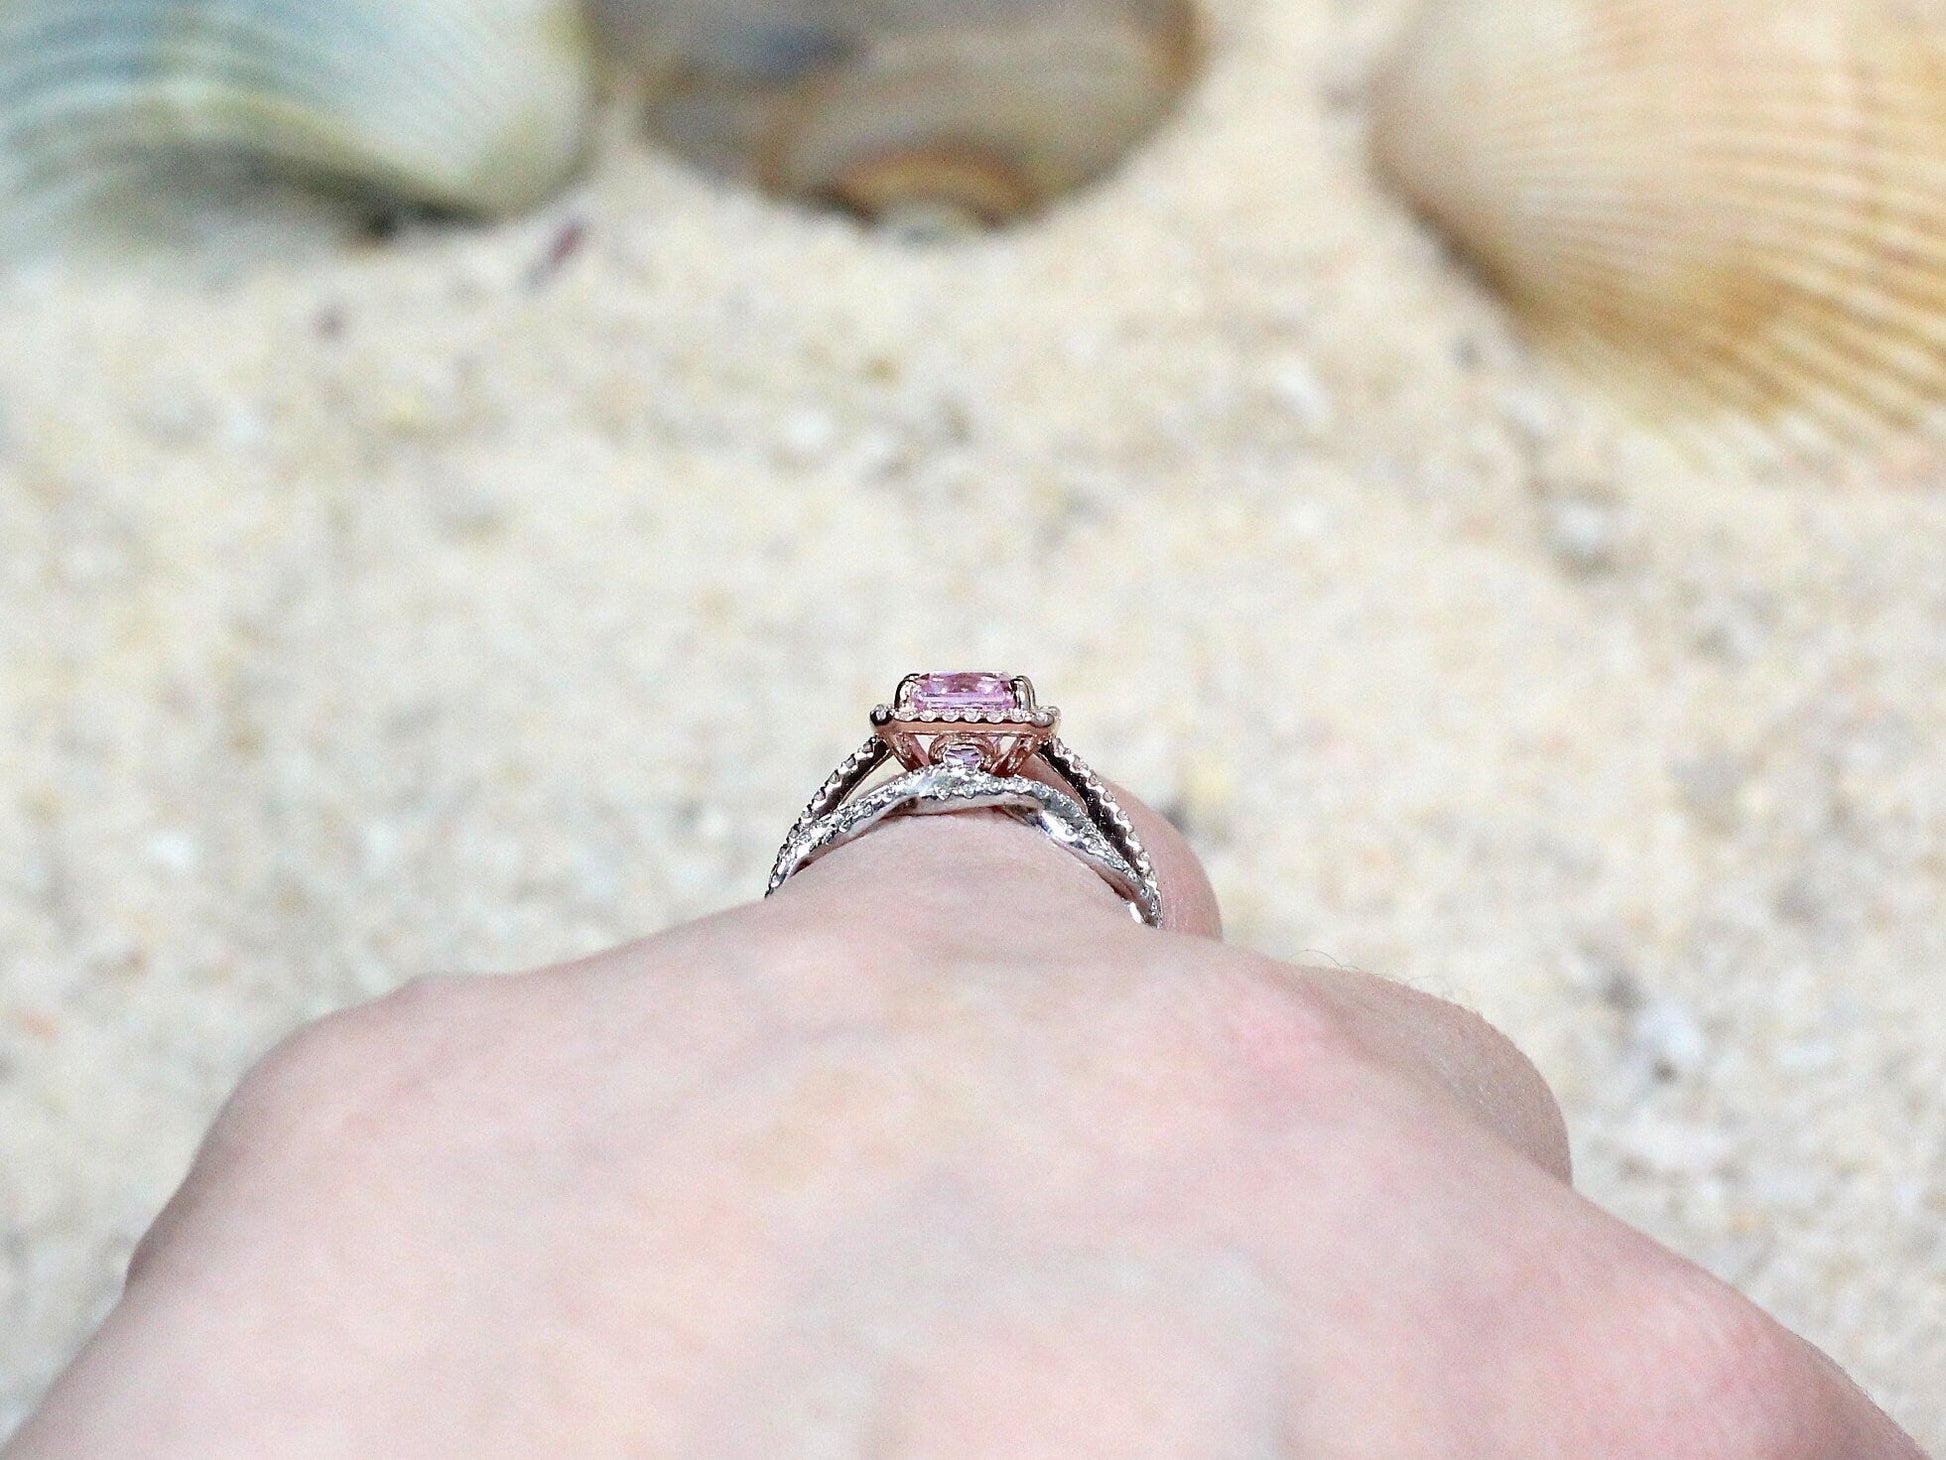 Pink Sapphire Engagement Ring Set,Infinity Band,Wedding Band Set,Hemera,2ct Ring,Sapphire Ring,Pink Sapphire Ring,White-Yellow-Rose Gold BellaMoreDesign.com